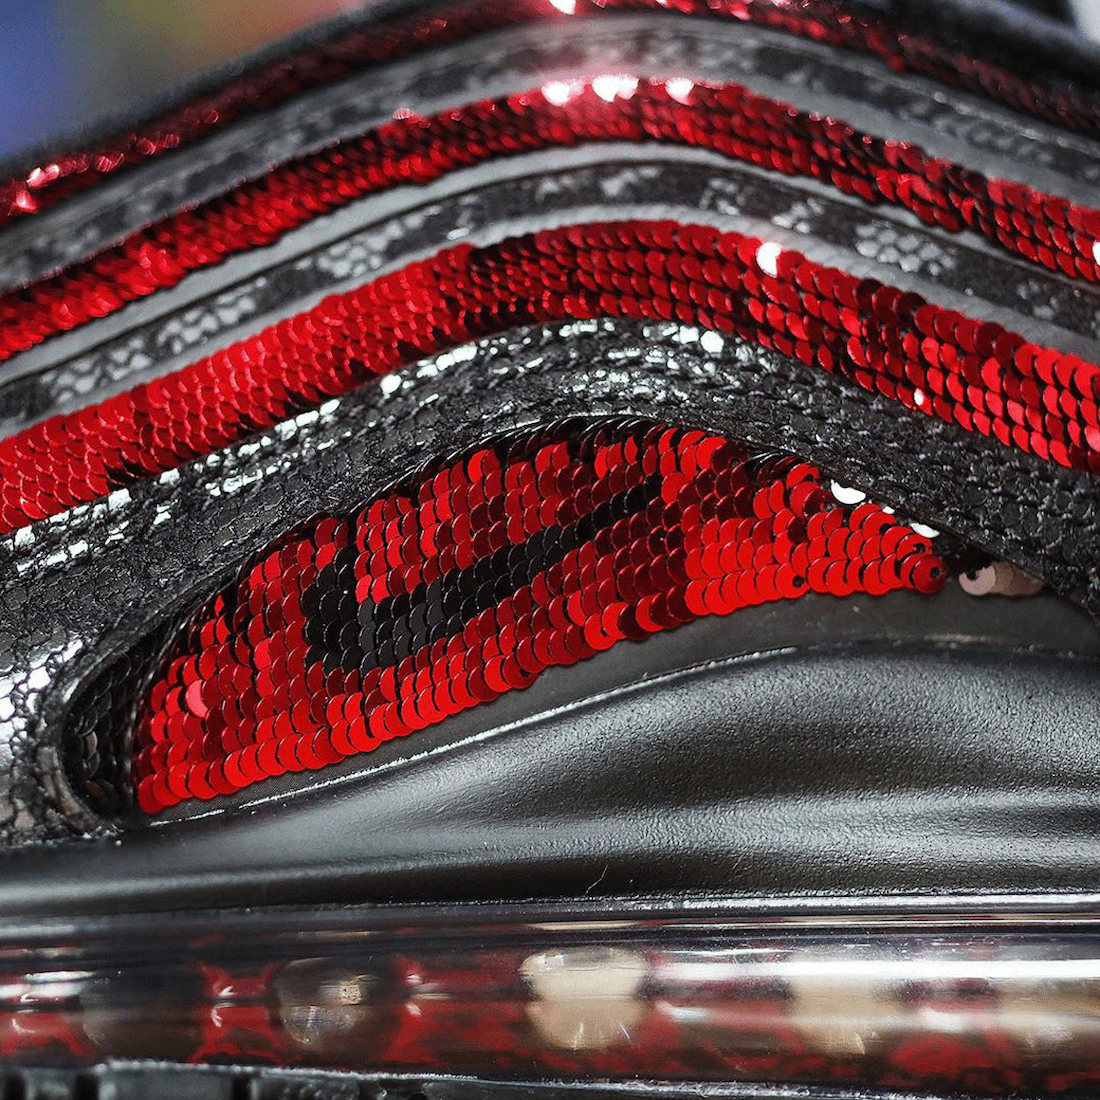 Nike Air Max 97 Sequin DC1709-060 Release Date